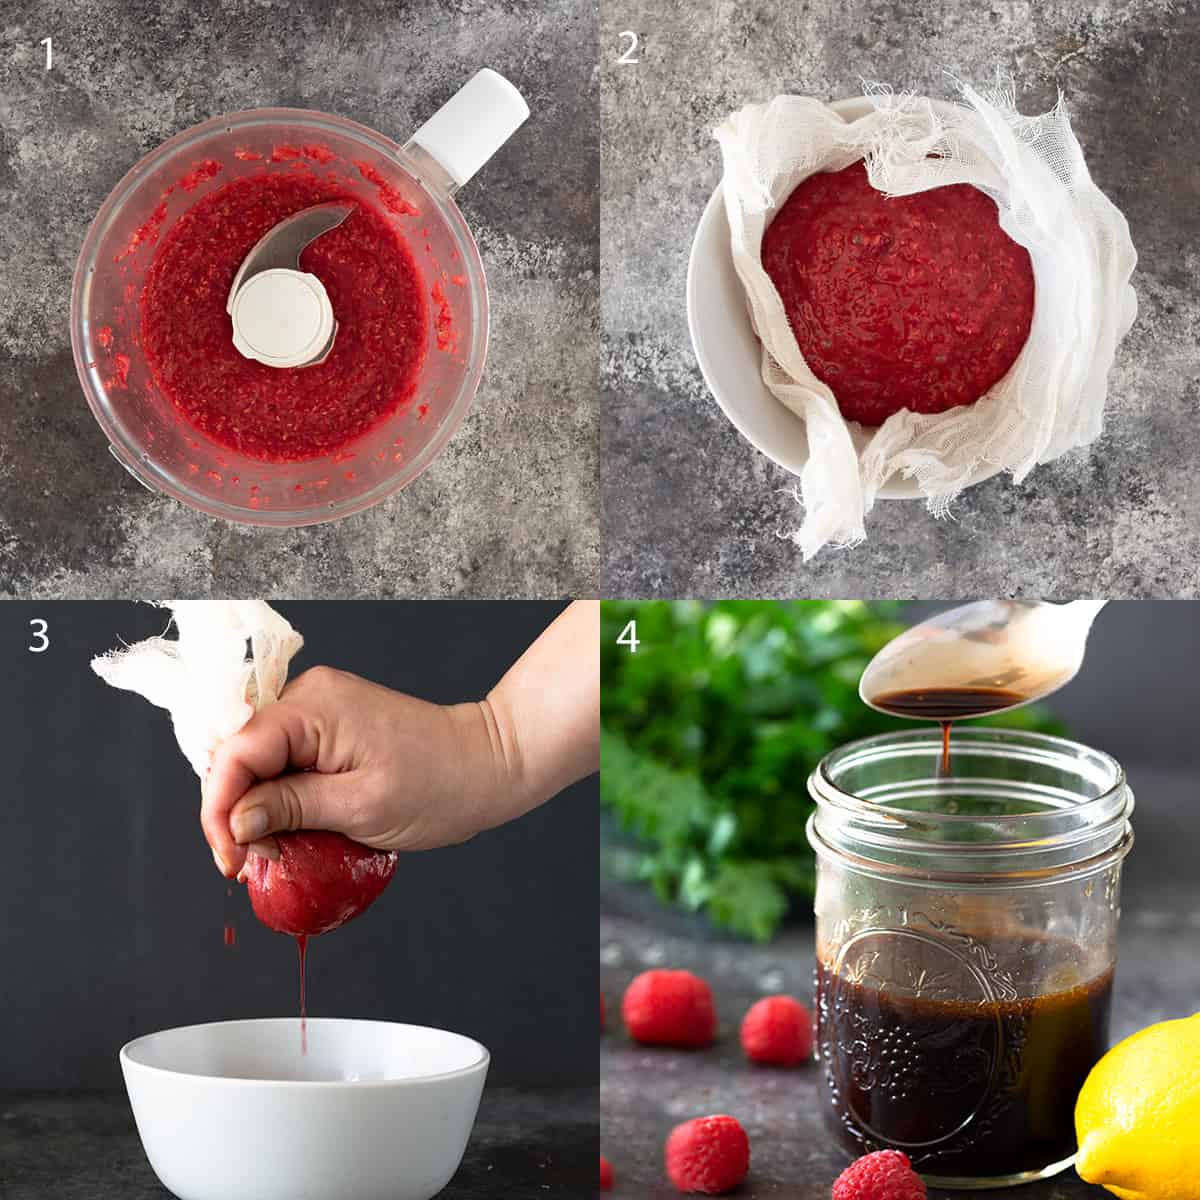 Making Raspberry Vinaigrette dressing step by step including pureeing and straining the raspberries and ixing ingredients.